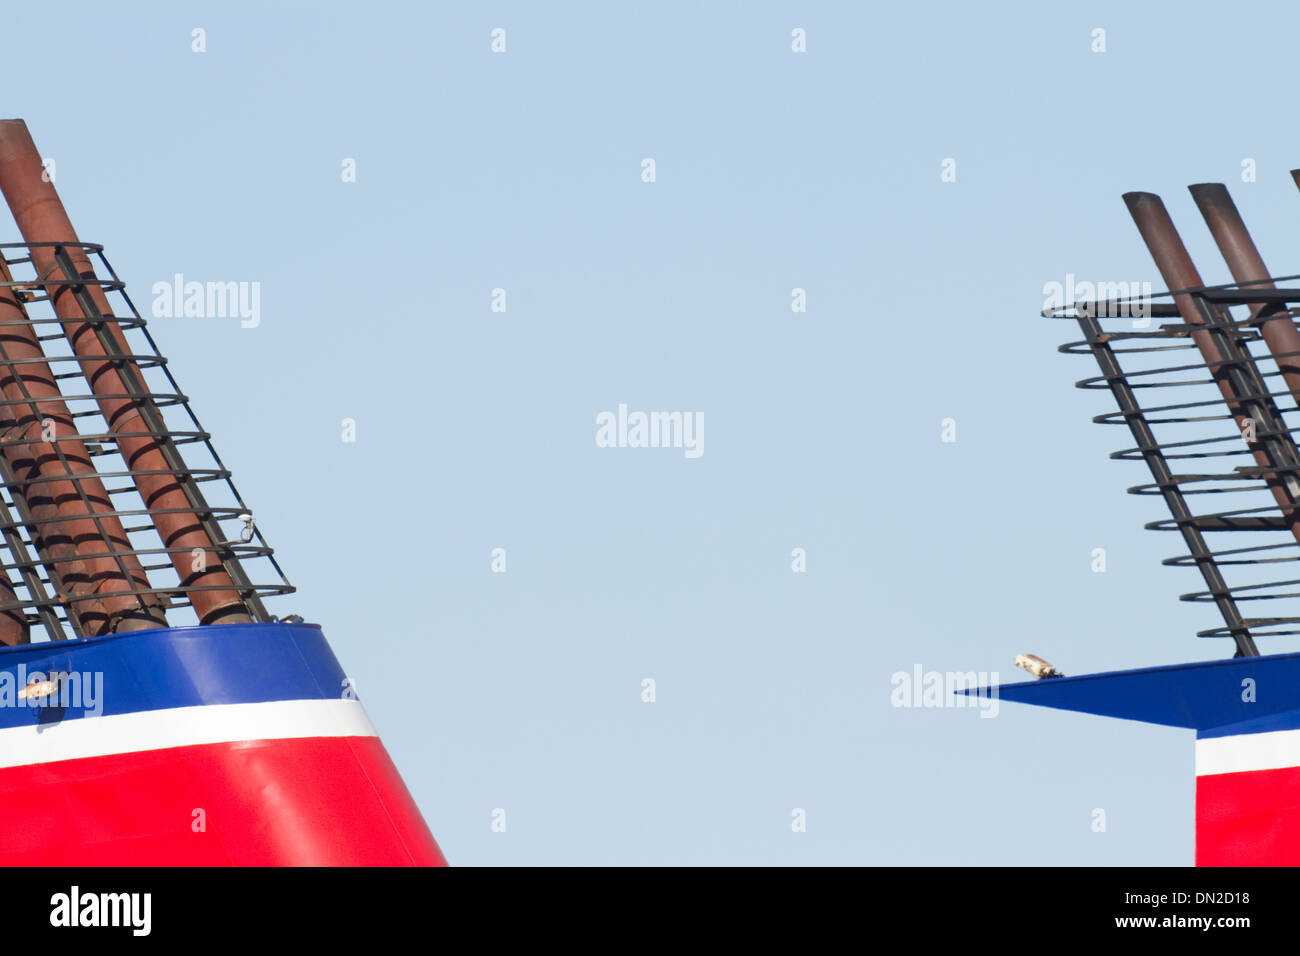 Funnels on a Stena Line ro/pax ferry. Stock Photo